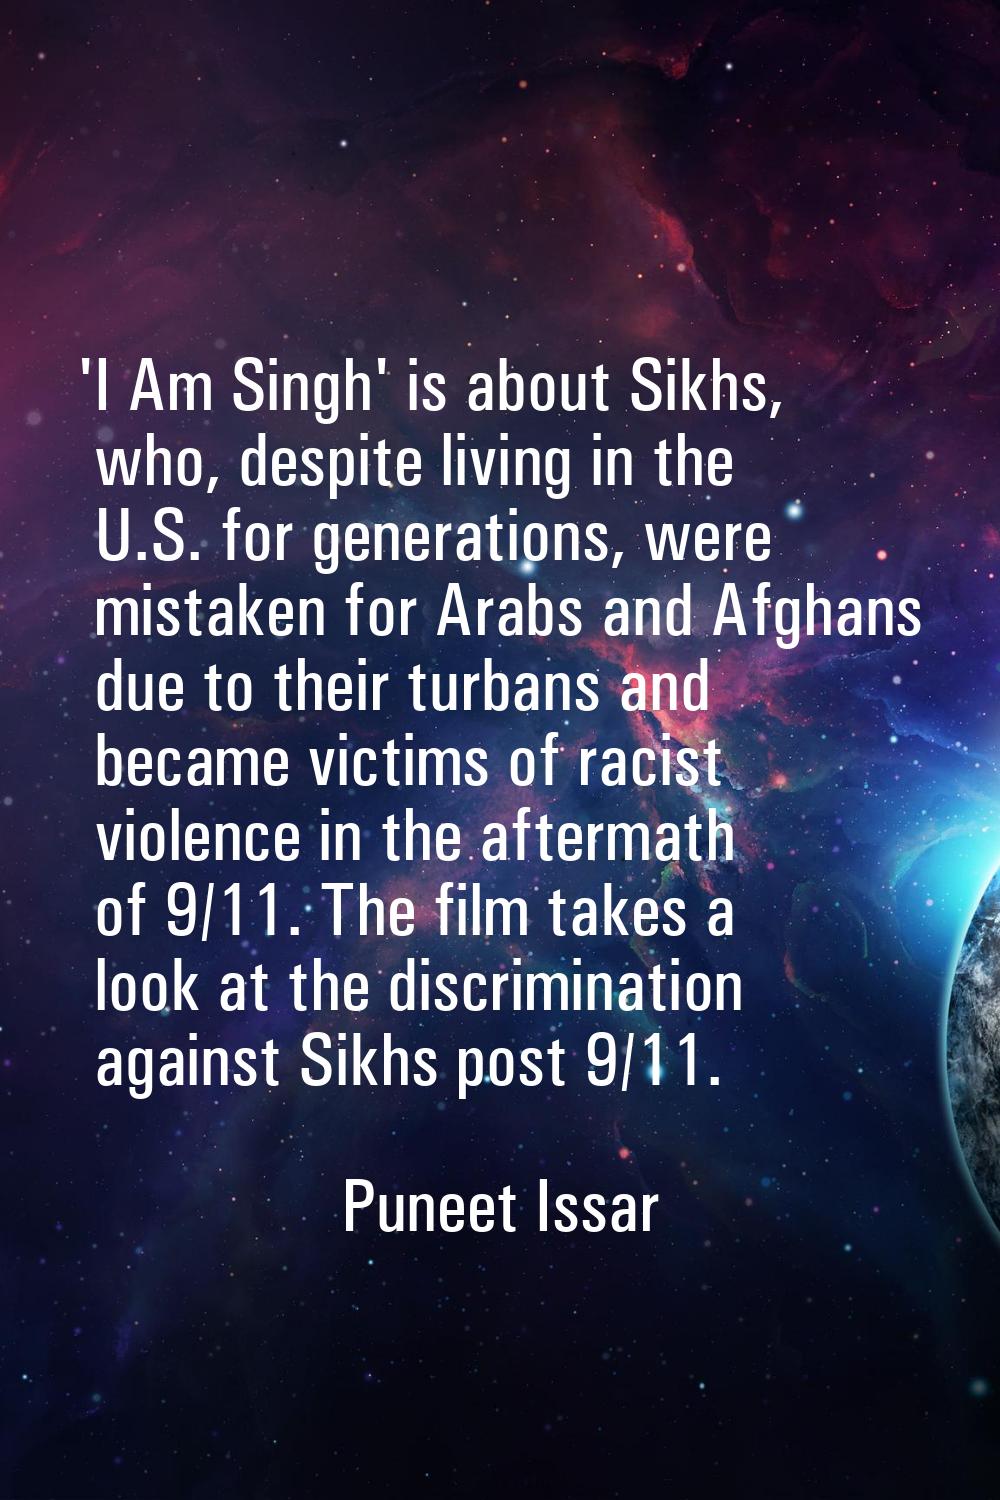 'I Am Singh' is about Sikhs, who, despite living in the U.S. for generations, were mistaken for Ara